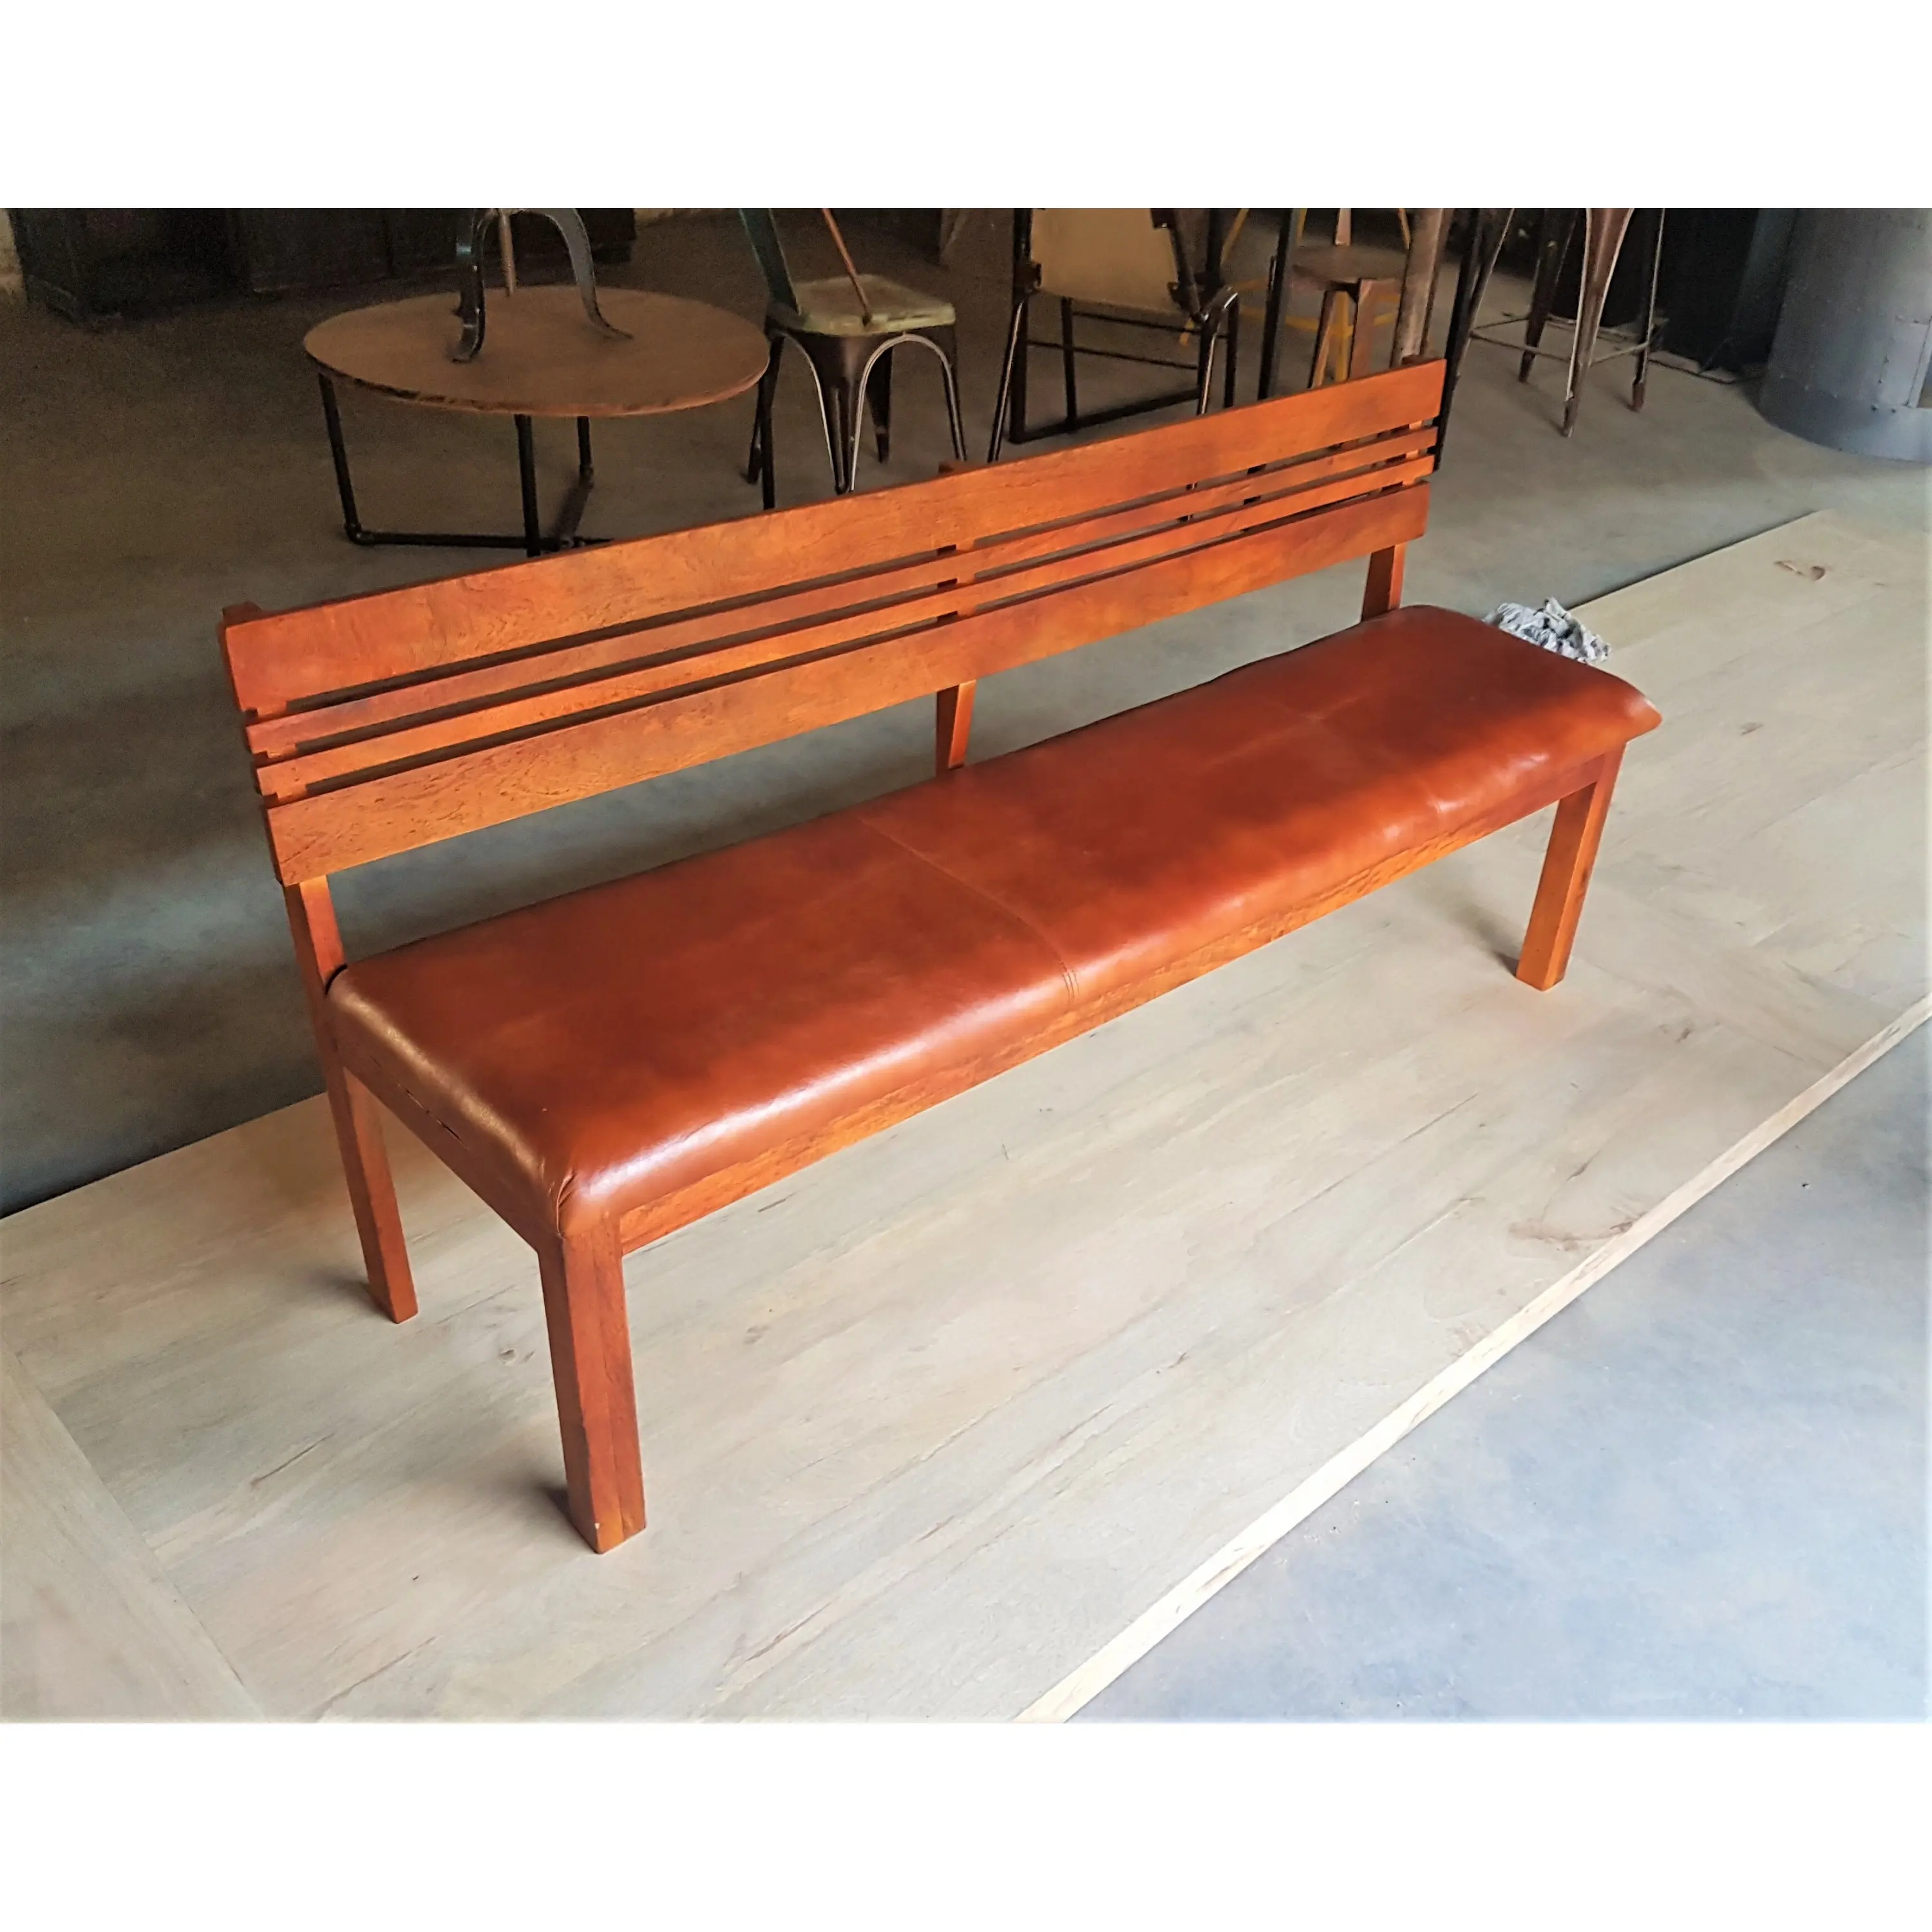 Wooden Bench, Genuine Leather living room bench, wood furniture